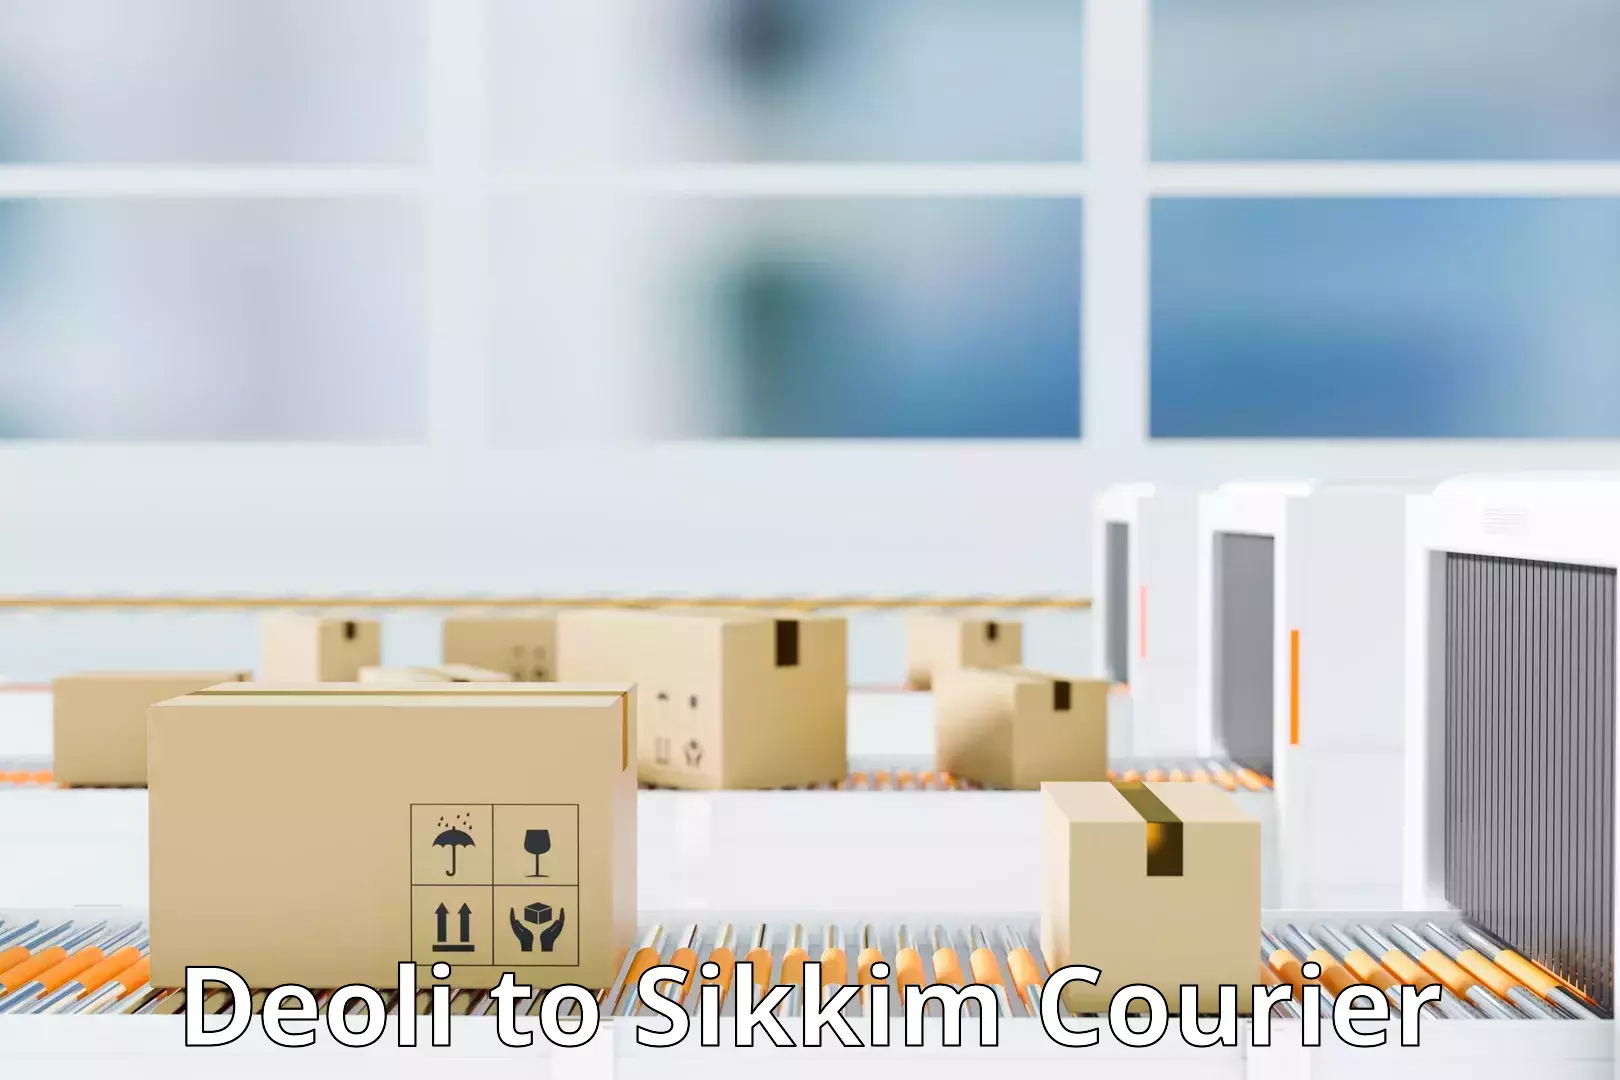 Efficient order fulfillment Deoli to East Sikkim